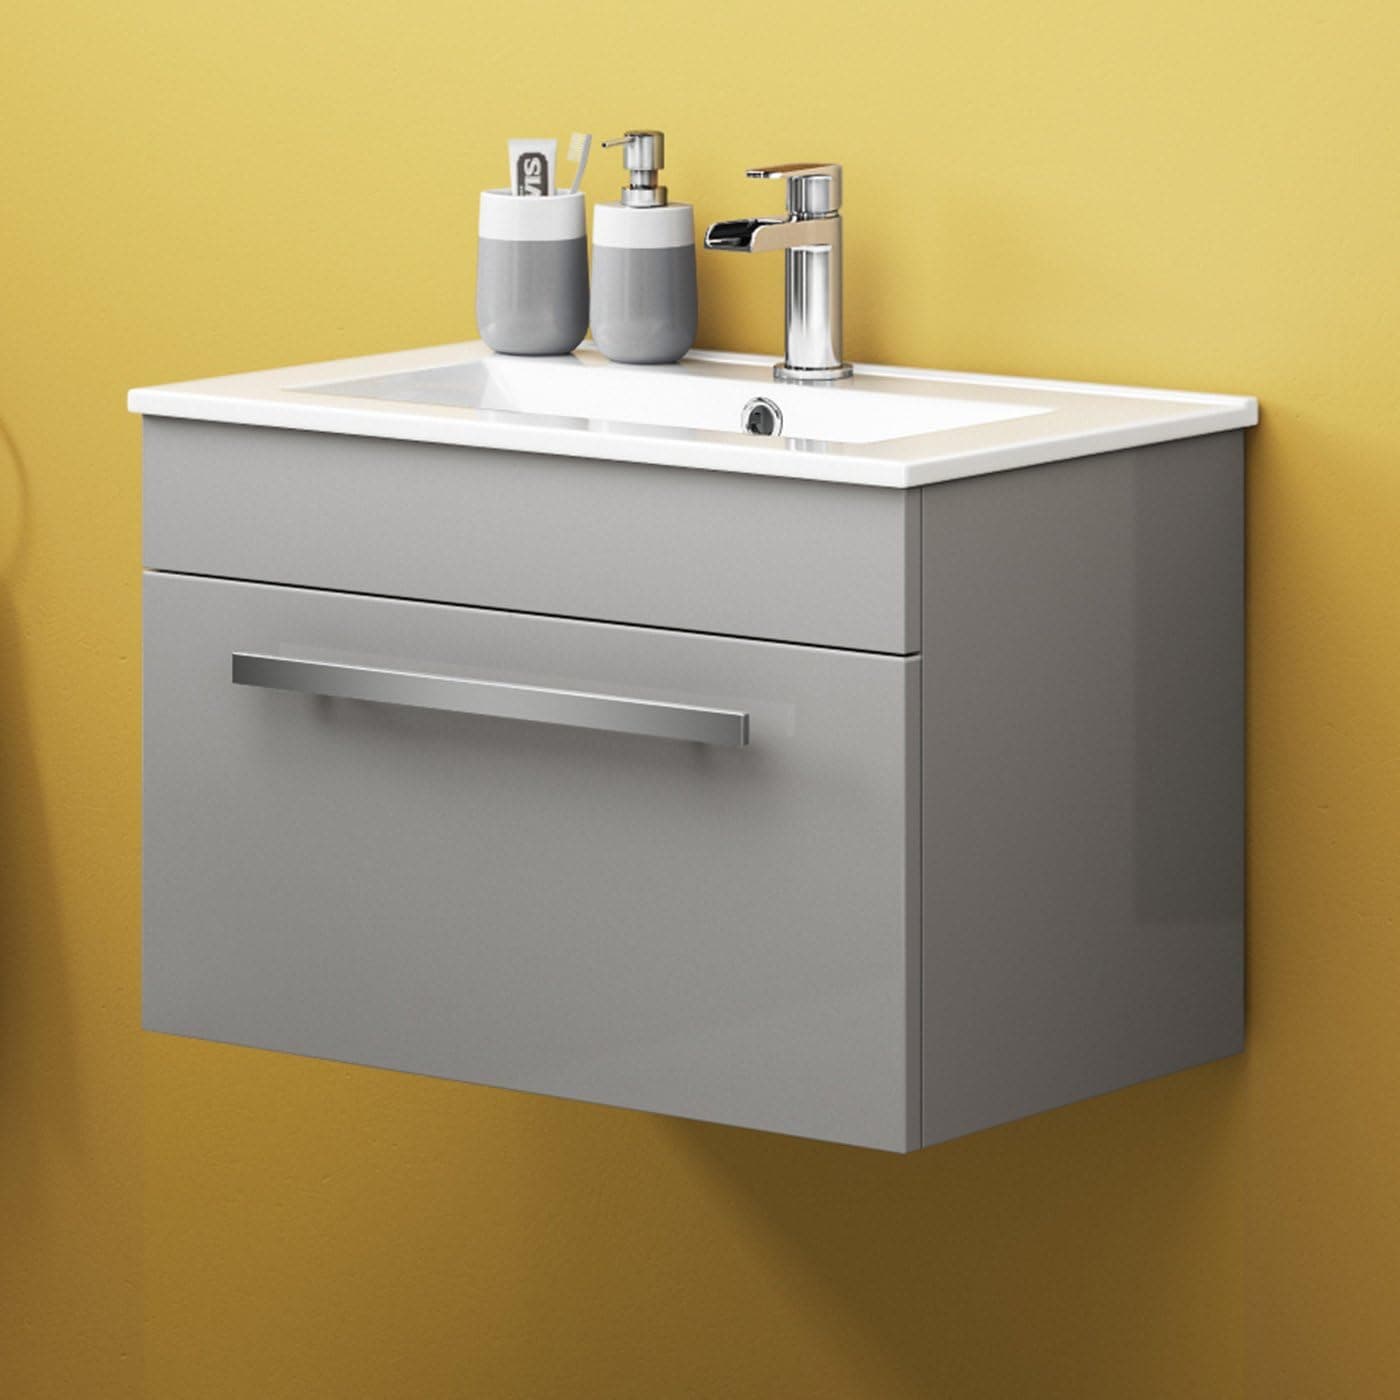 Avon 1 Drawer Wall Hung Vanity Unit With Basin - 615mm x 415mm - 1 Tap Hole